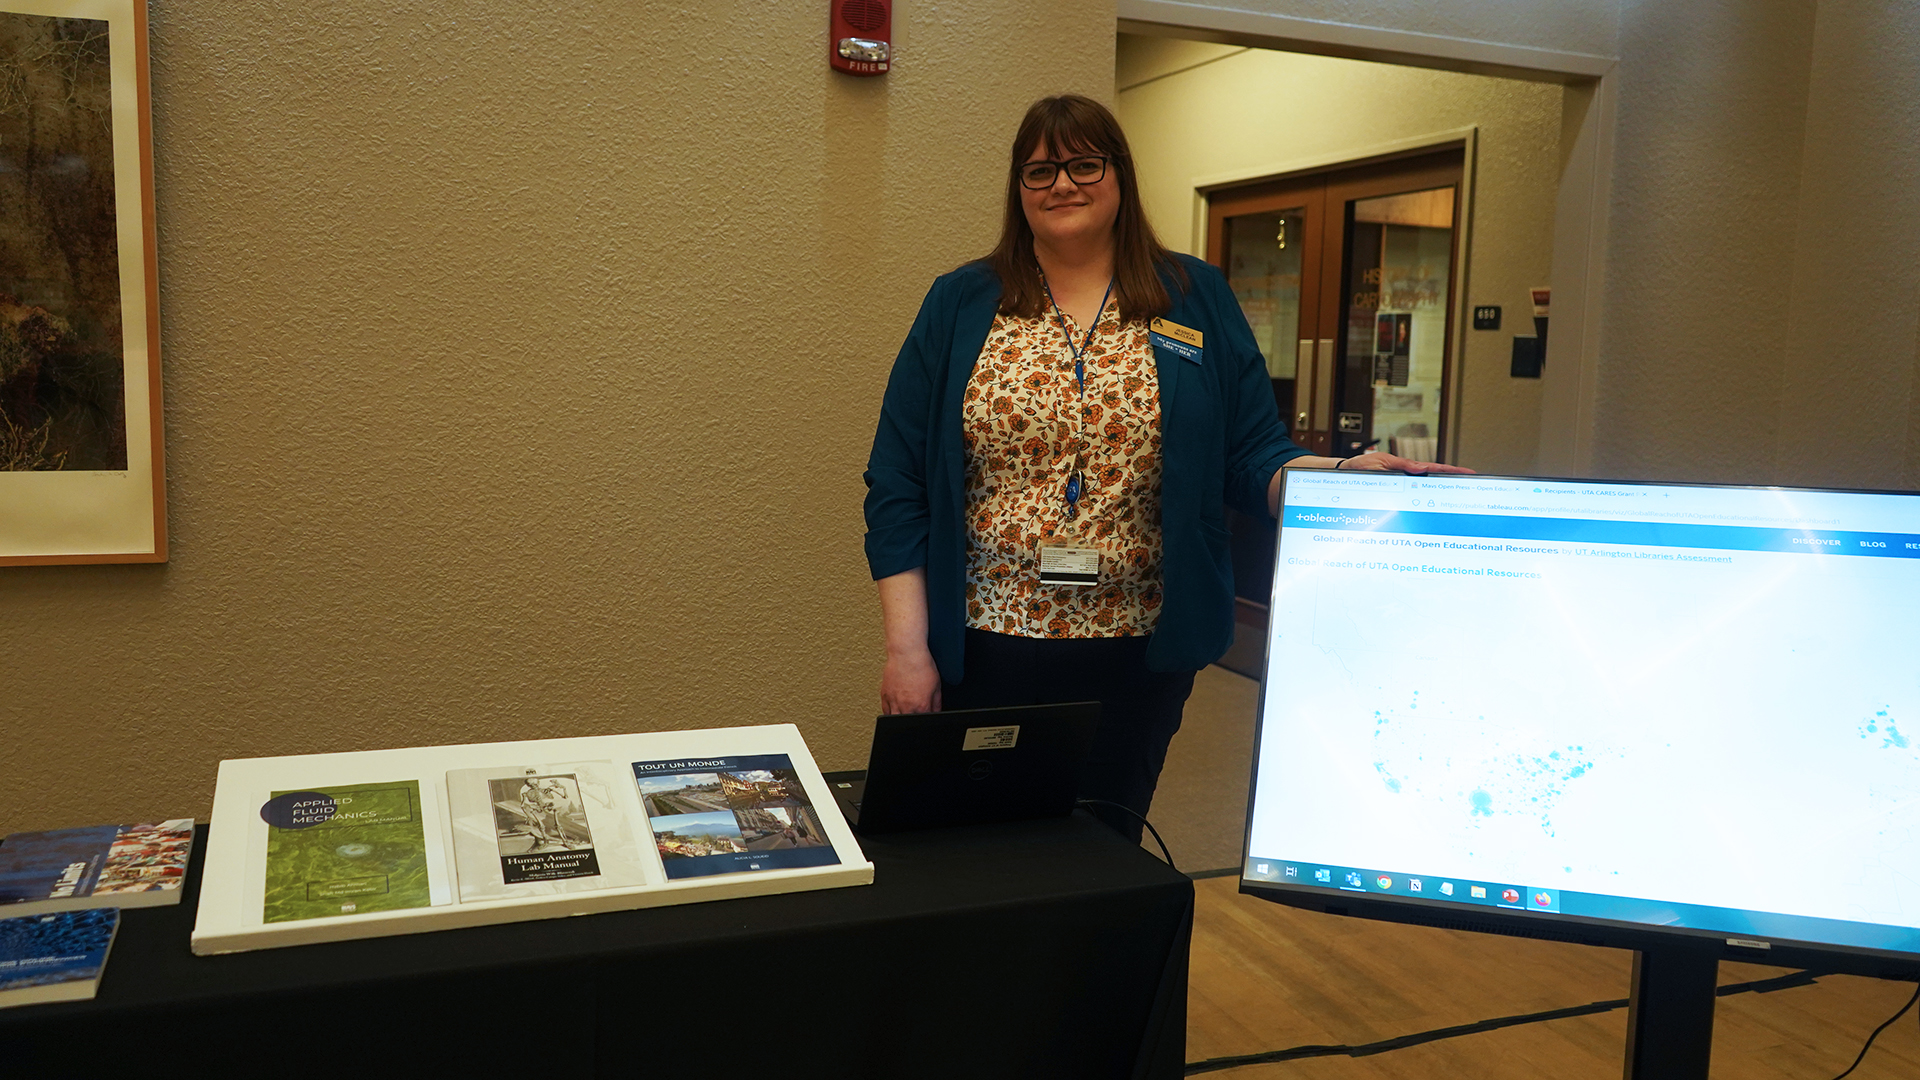 Director of Open Educational Resources Jessica McClean stands beside a digital display of a Tableau and a table display of books in the Atrium of Central Library.